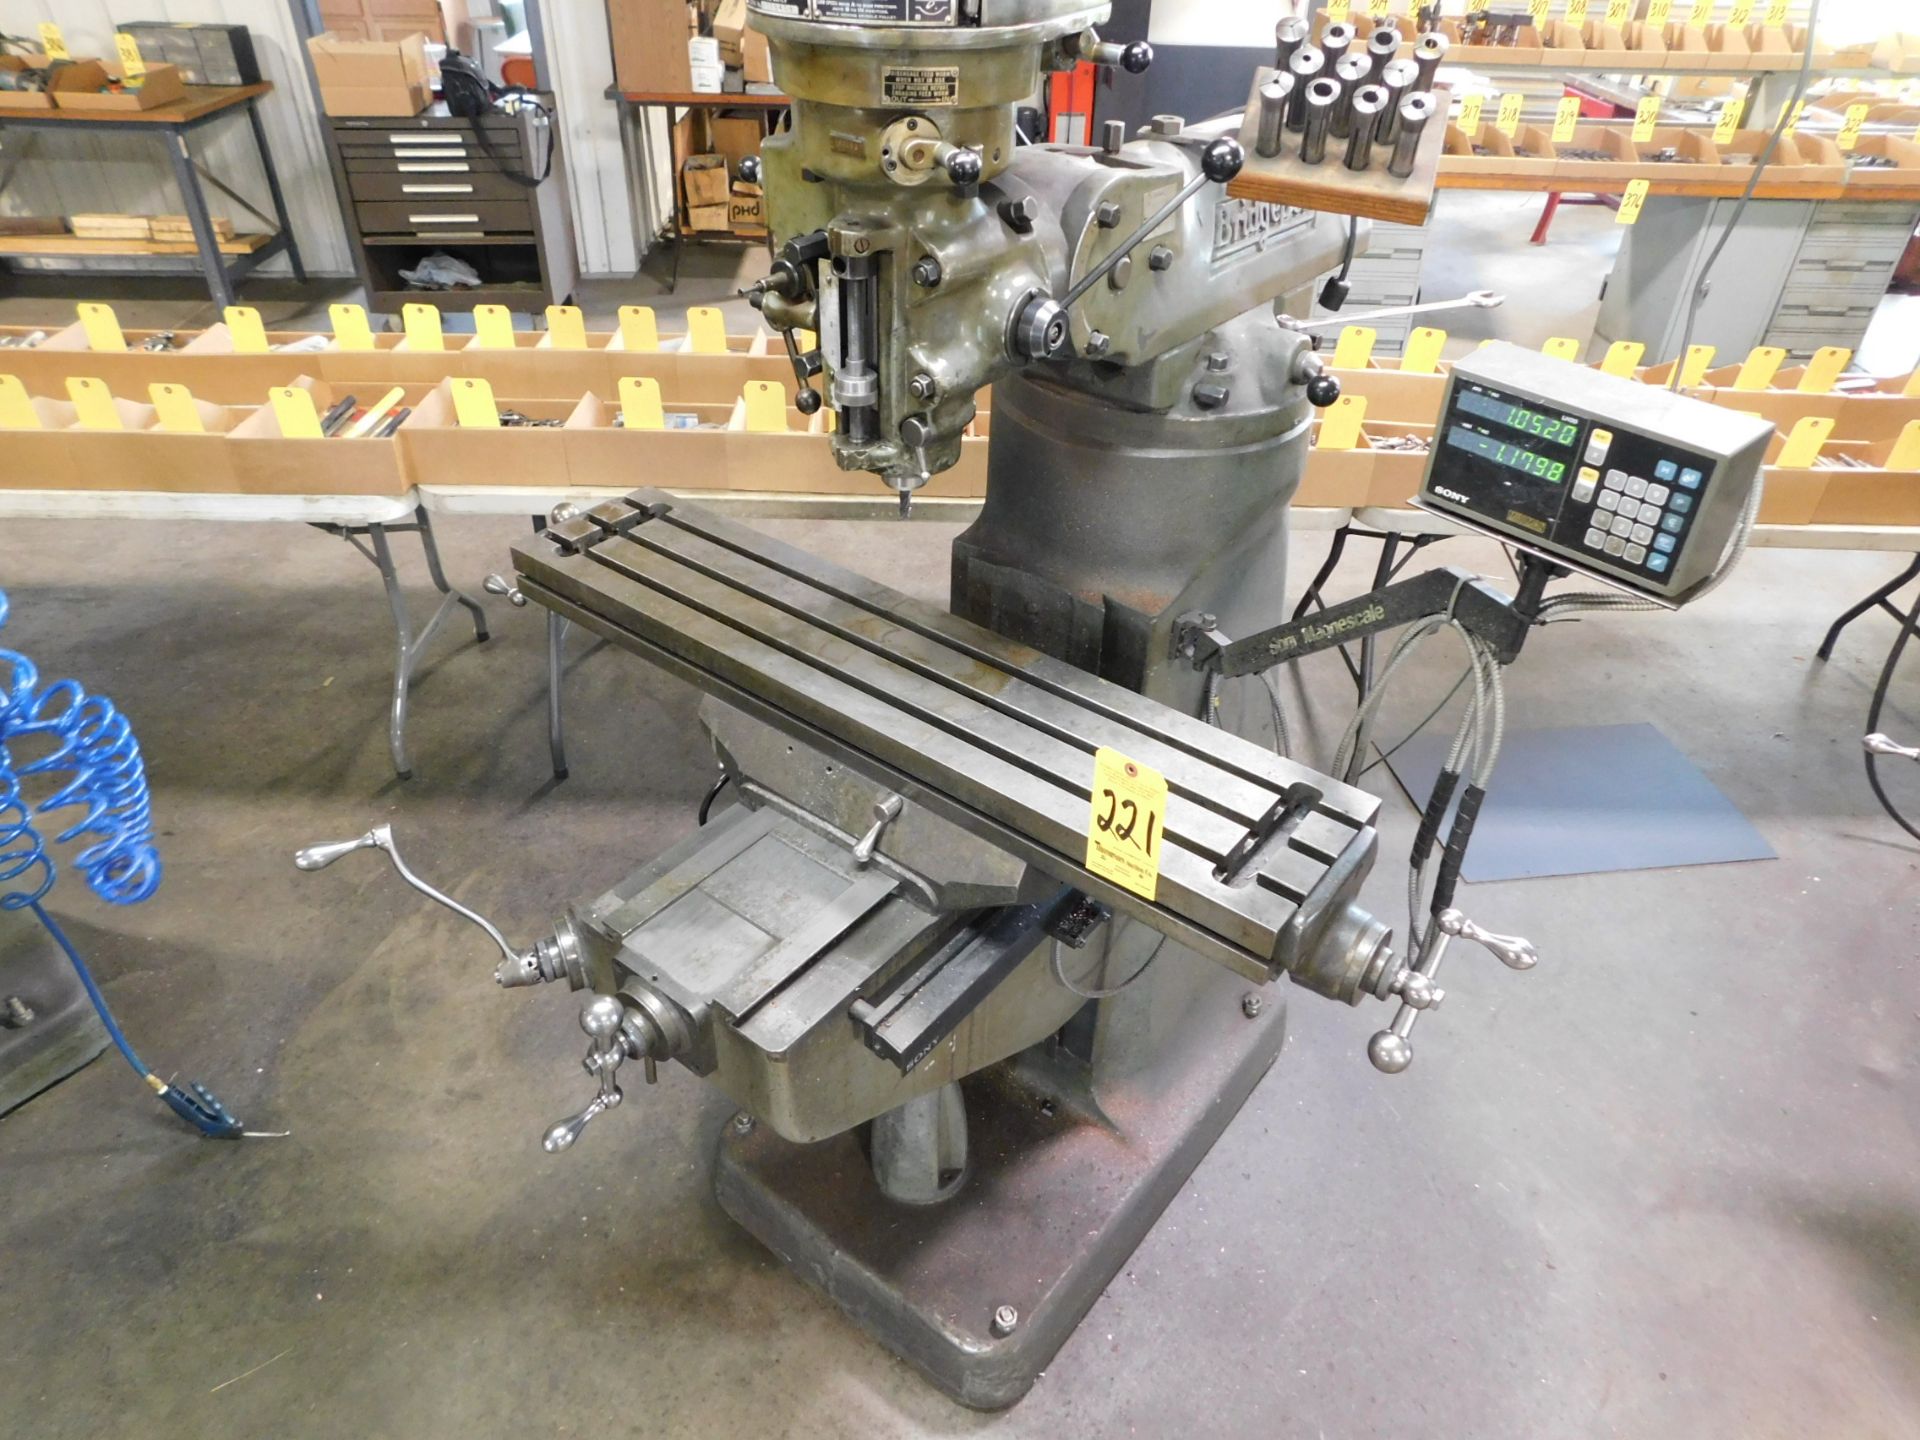 Bridgeport 1H.P. Step Pulley Vertical Mill sn#12BR139963, 9"X42" Table, R-8 Collets, Sony 2-Axis - Image 2 of 12